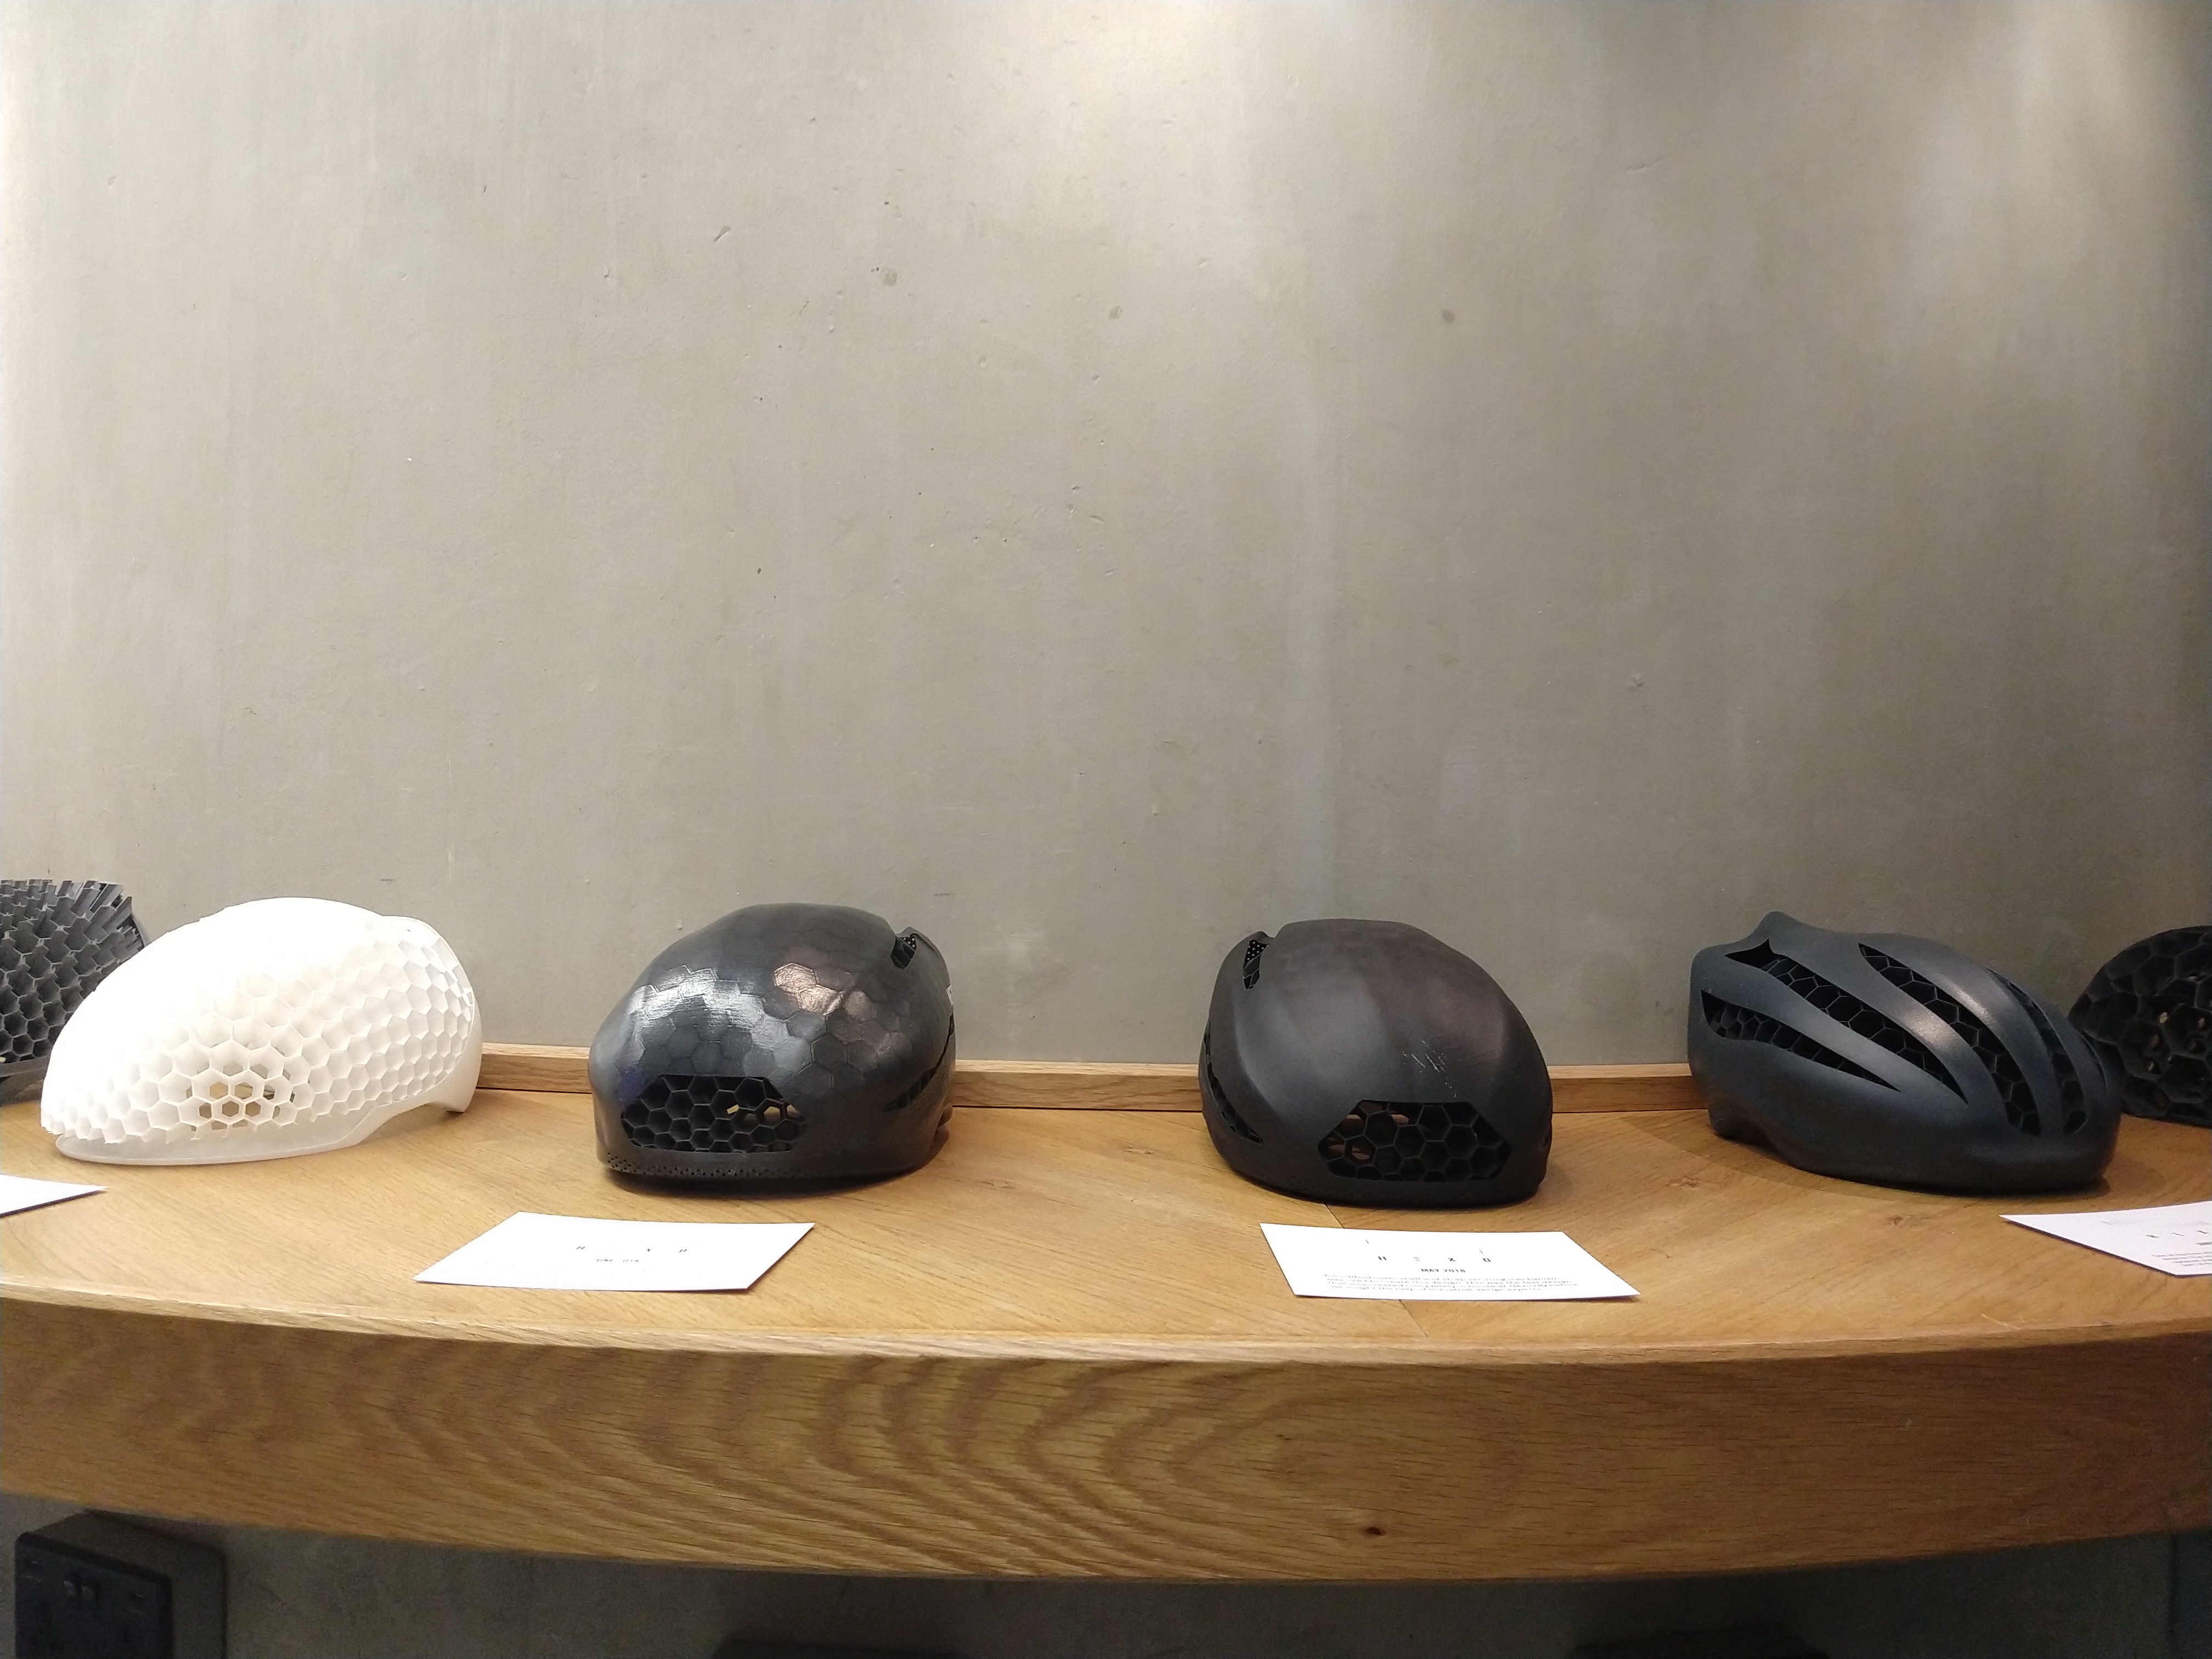 Different iterations of the Hexo Helmet in various development stages on display at the event.